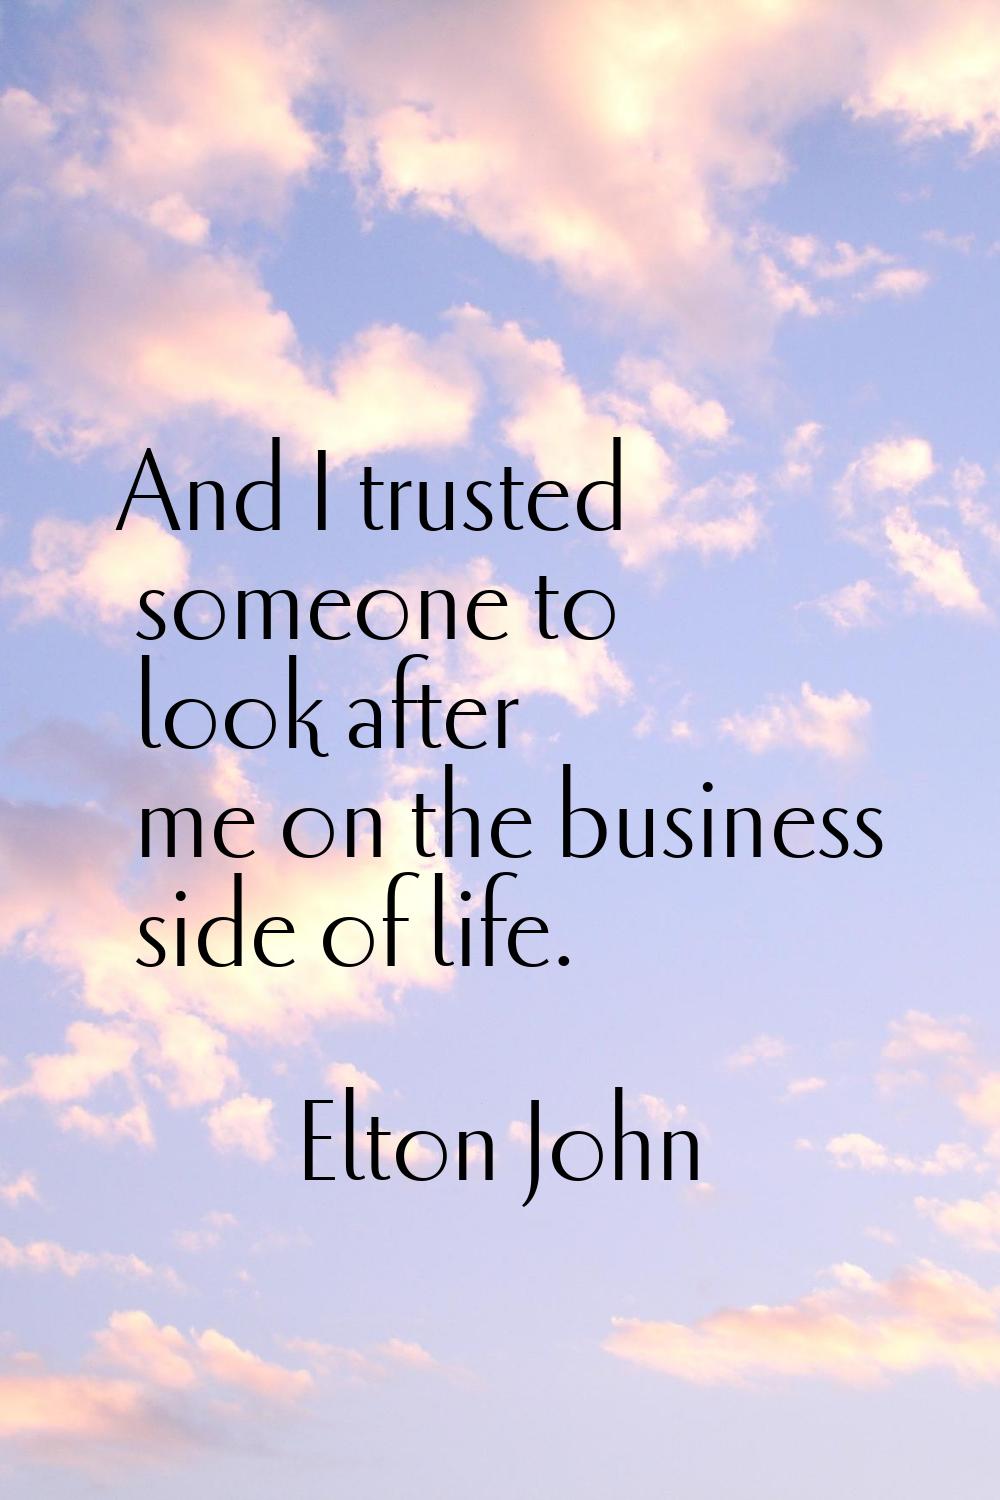 And I trusted someone to look after me on the business side of life.